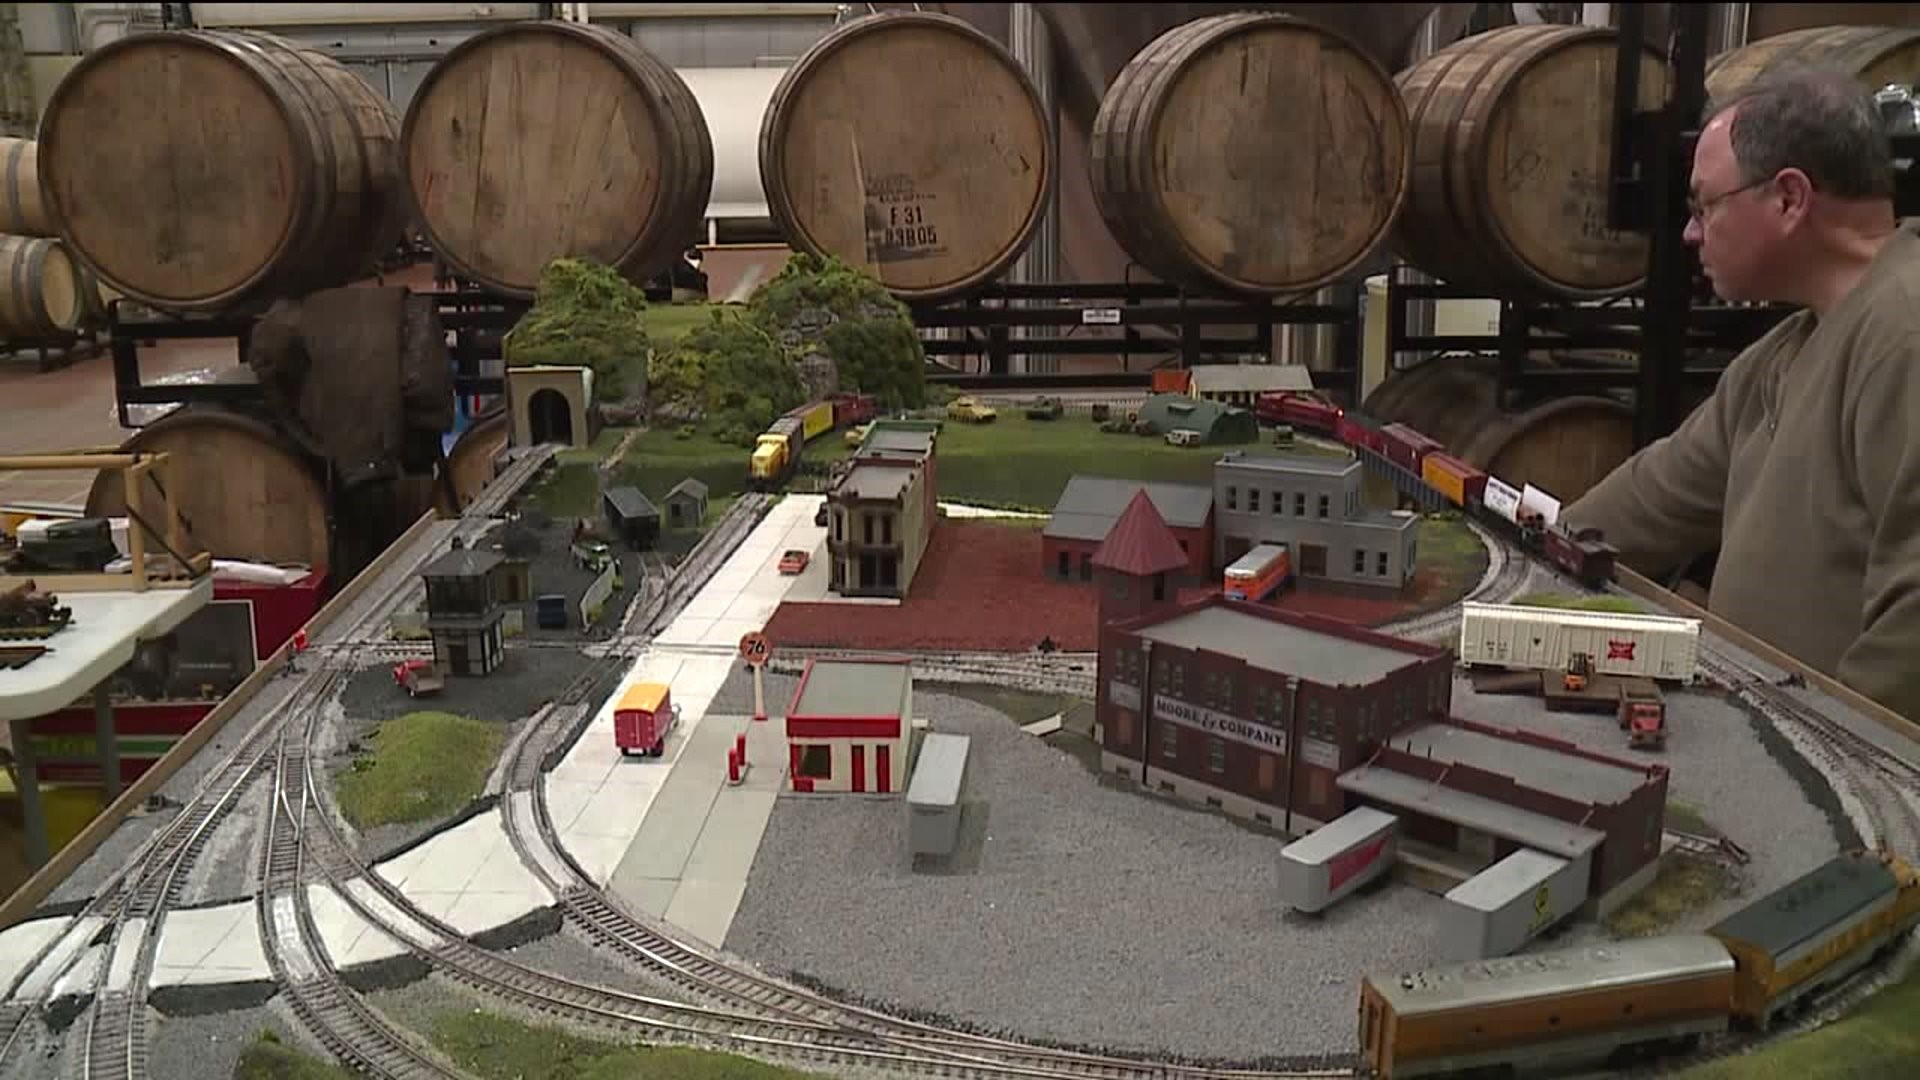 Holiday Brews and Model Trains for a Cause in Luzerne County